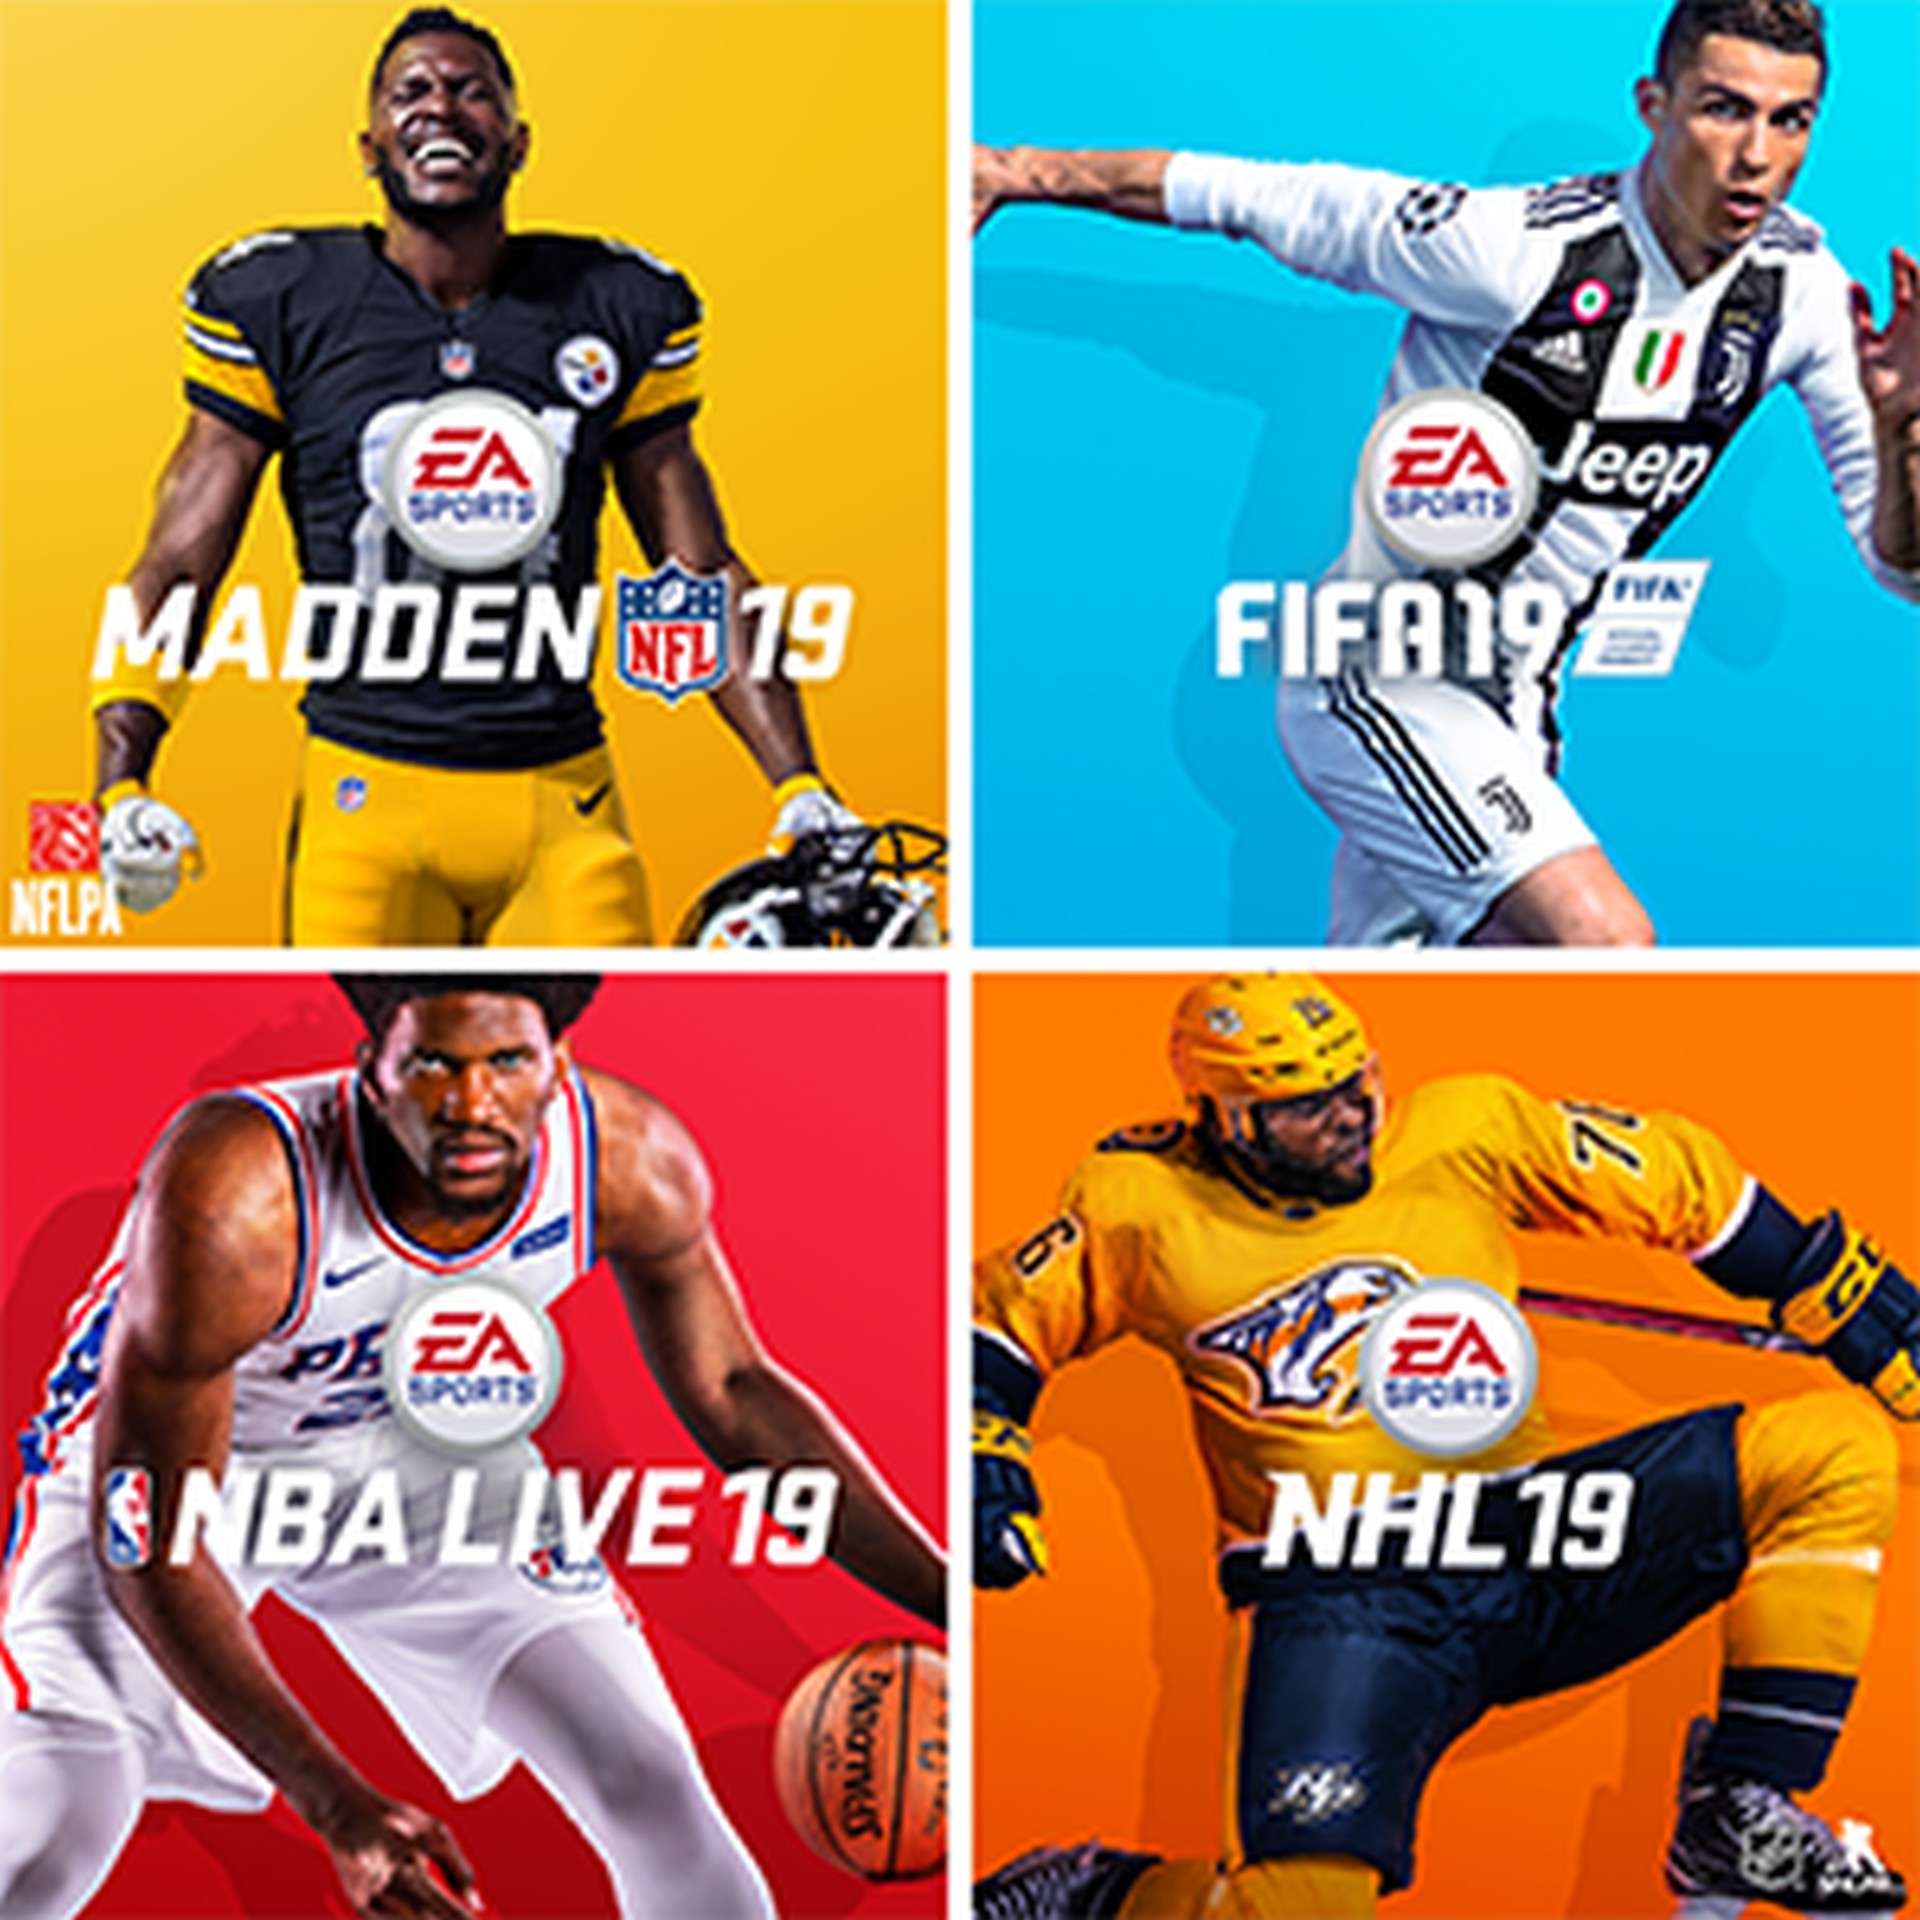 EA SPORTS FIFA 18 & NHL 18 Bundle Is Now Available For Xbox One - Xbox Wire